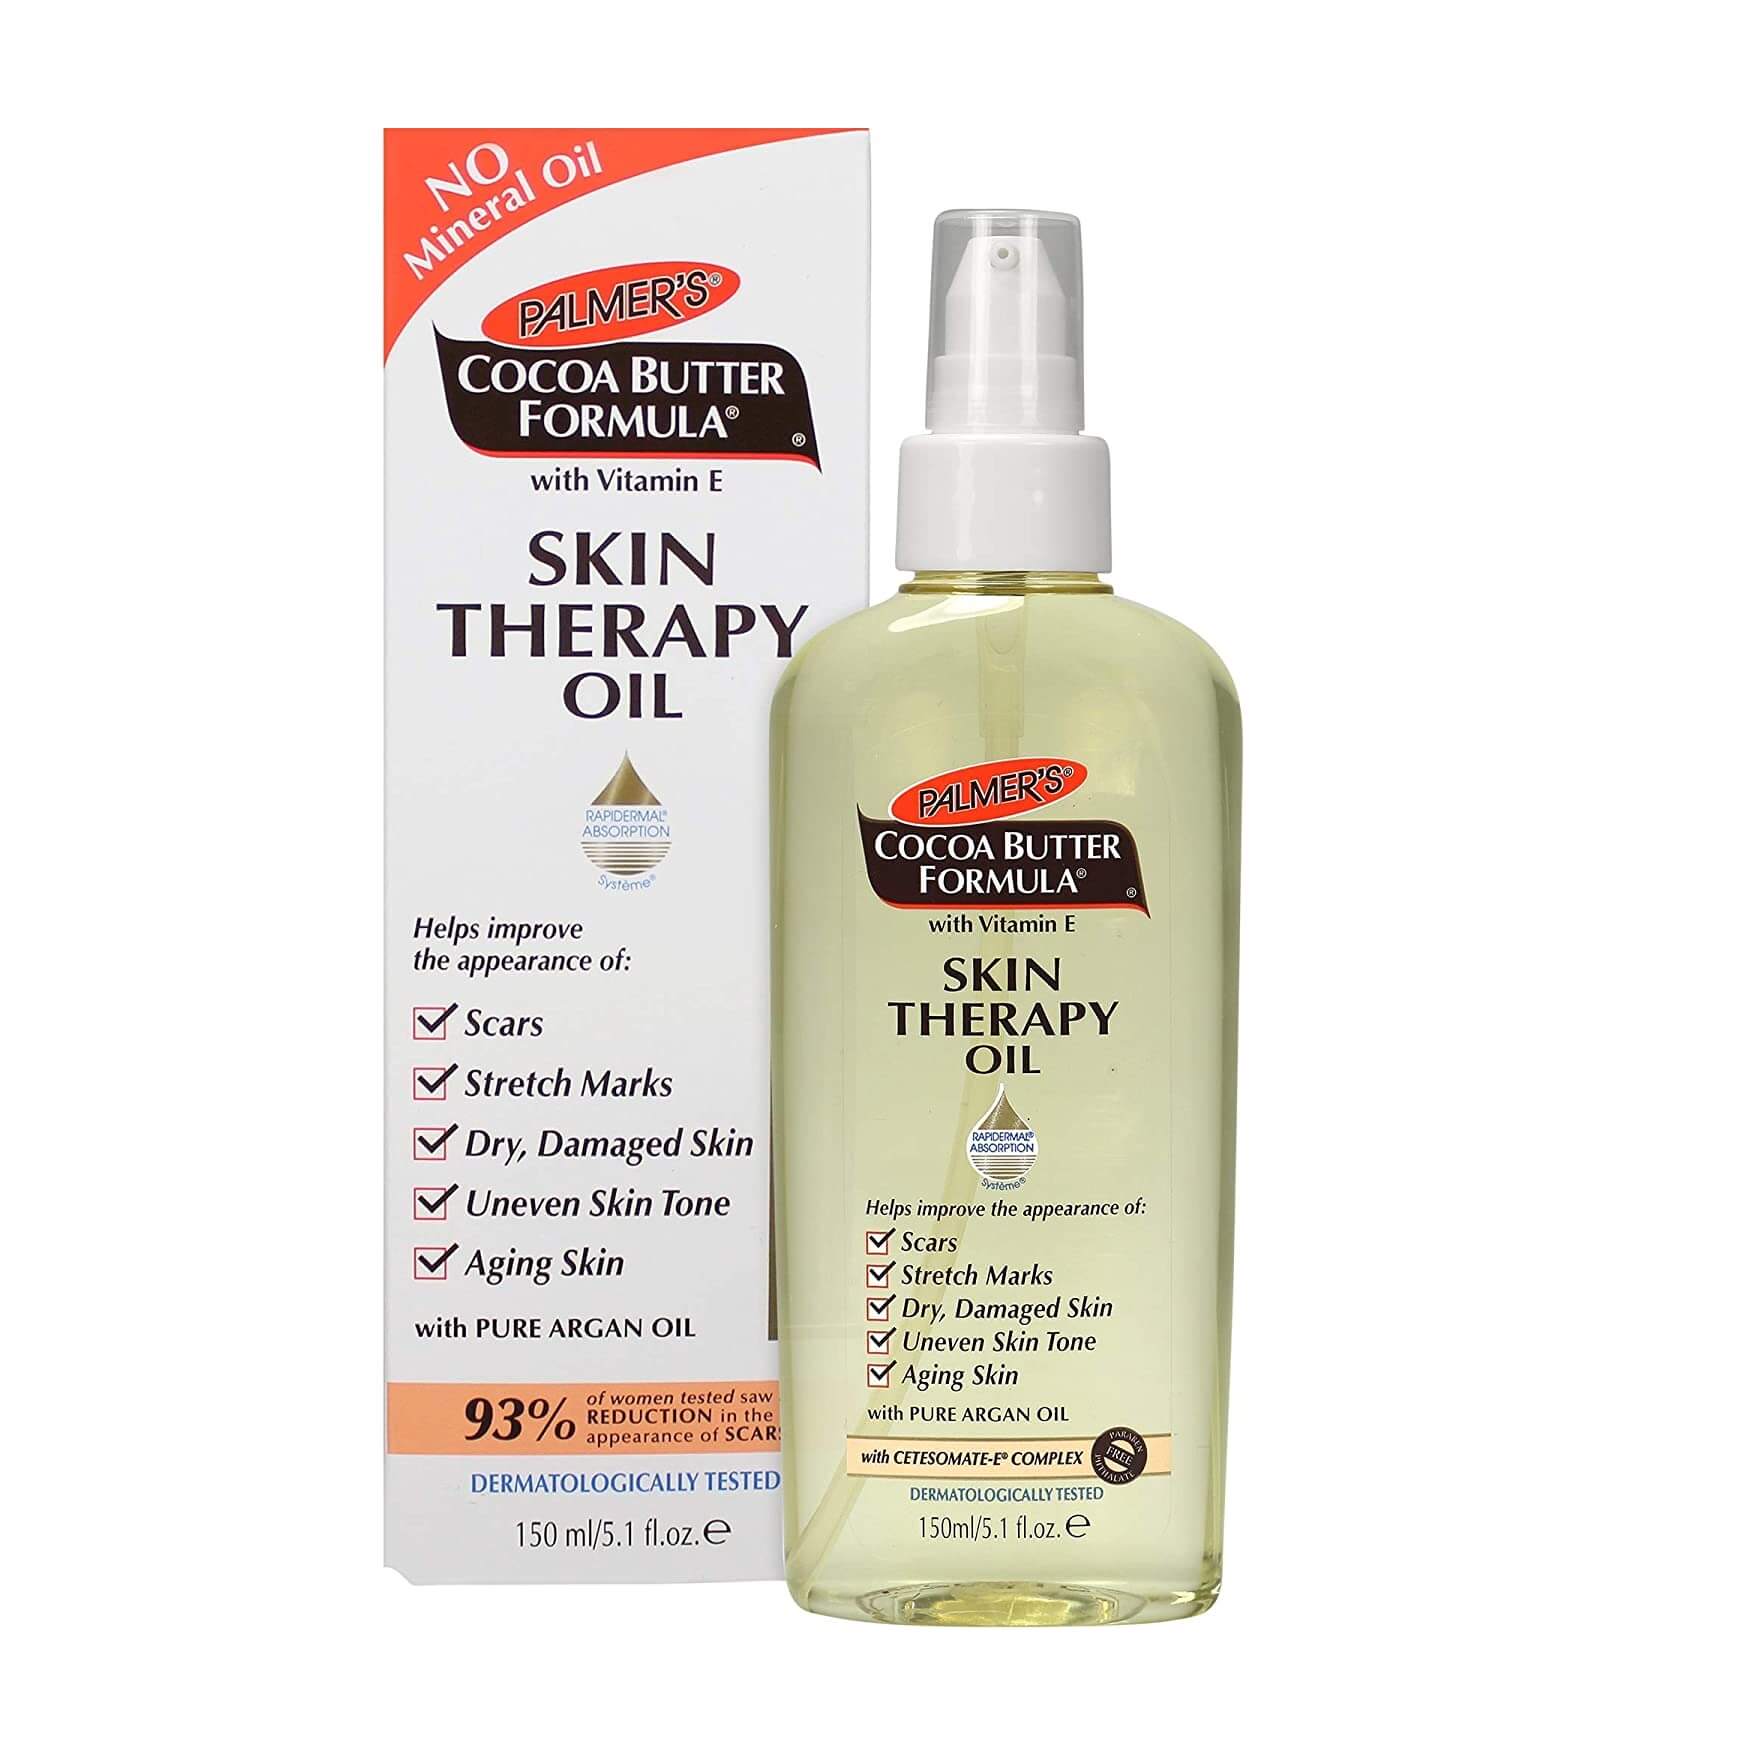 Palmers Cocoa Butter Skin Therapy Moisturizing Body Oil